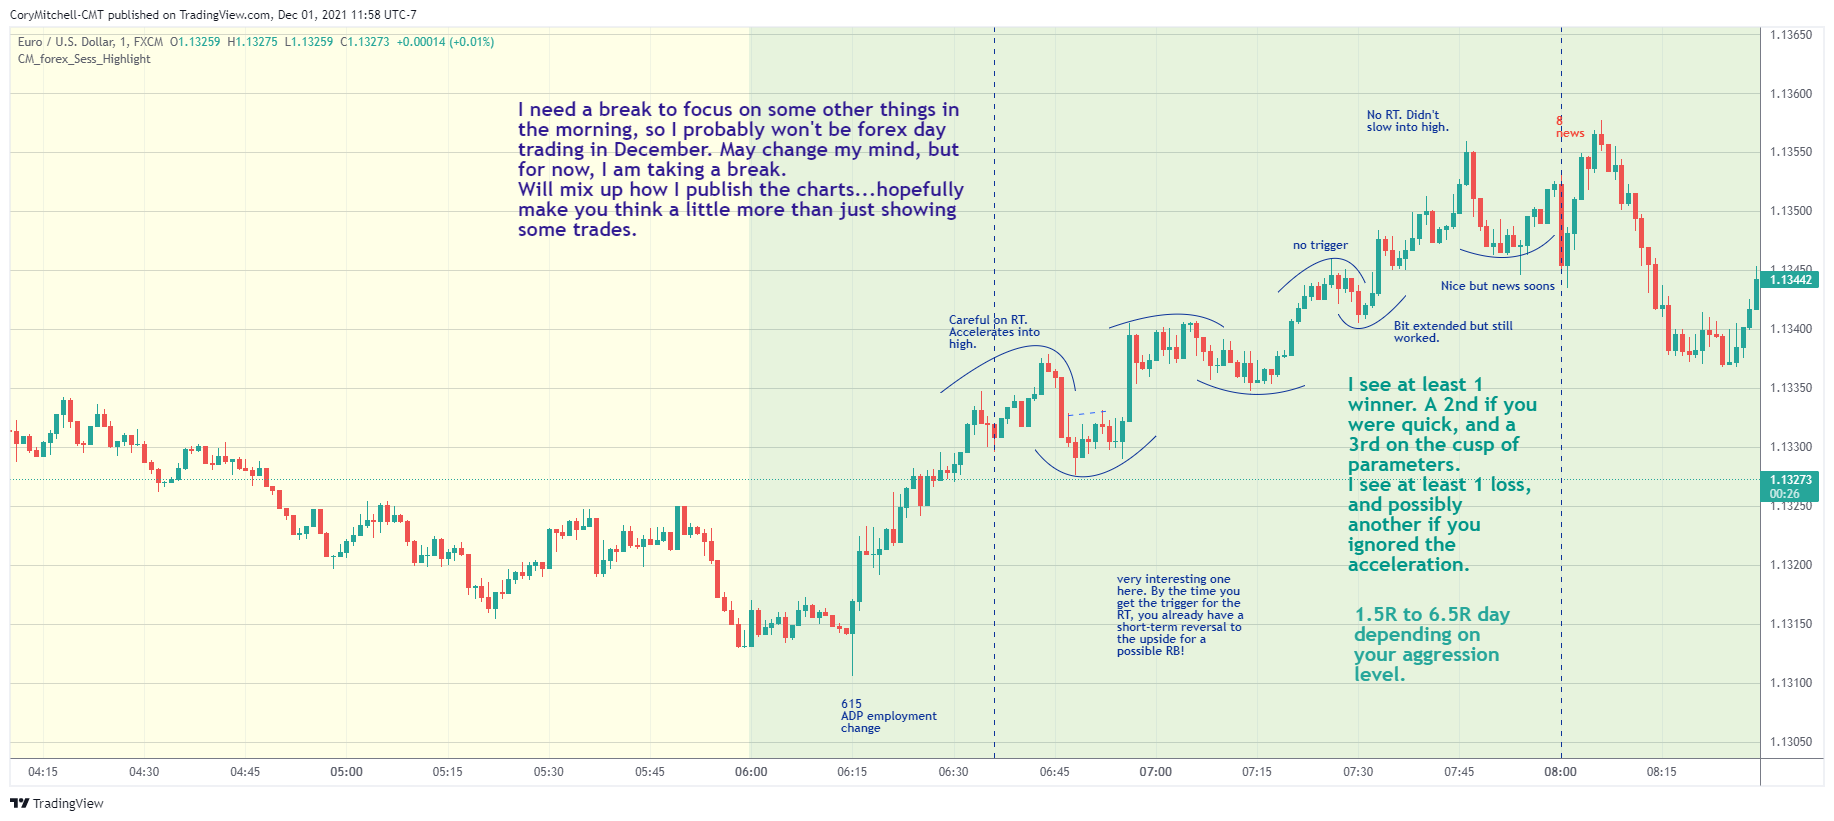 EURUSD day trading examples on 1-minute chart Dec. 1